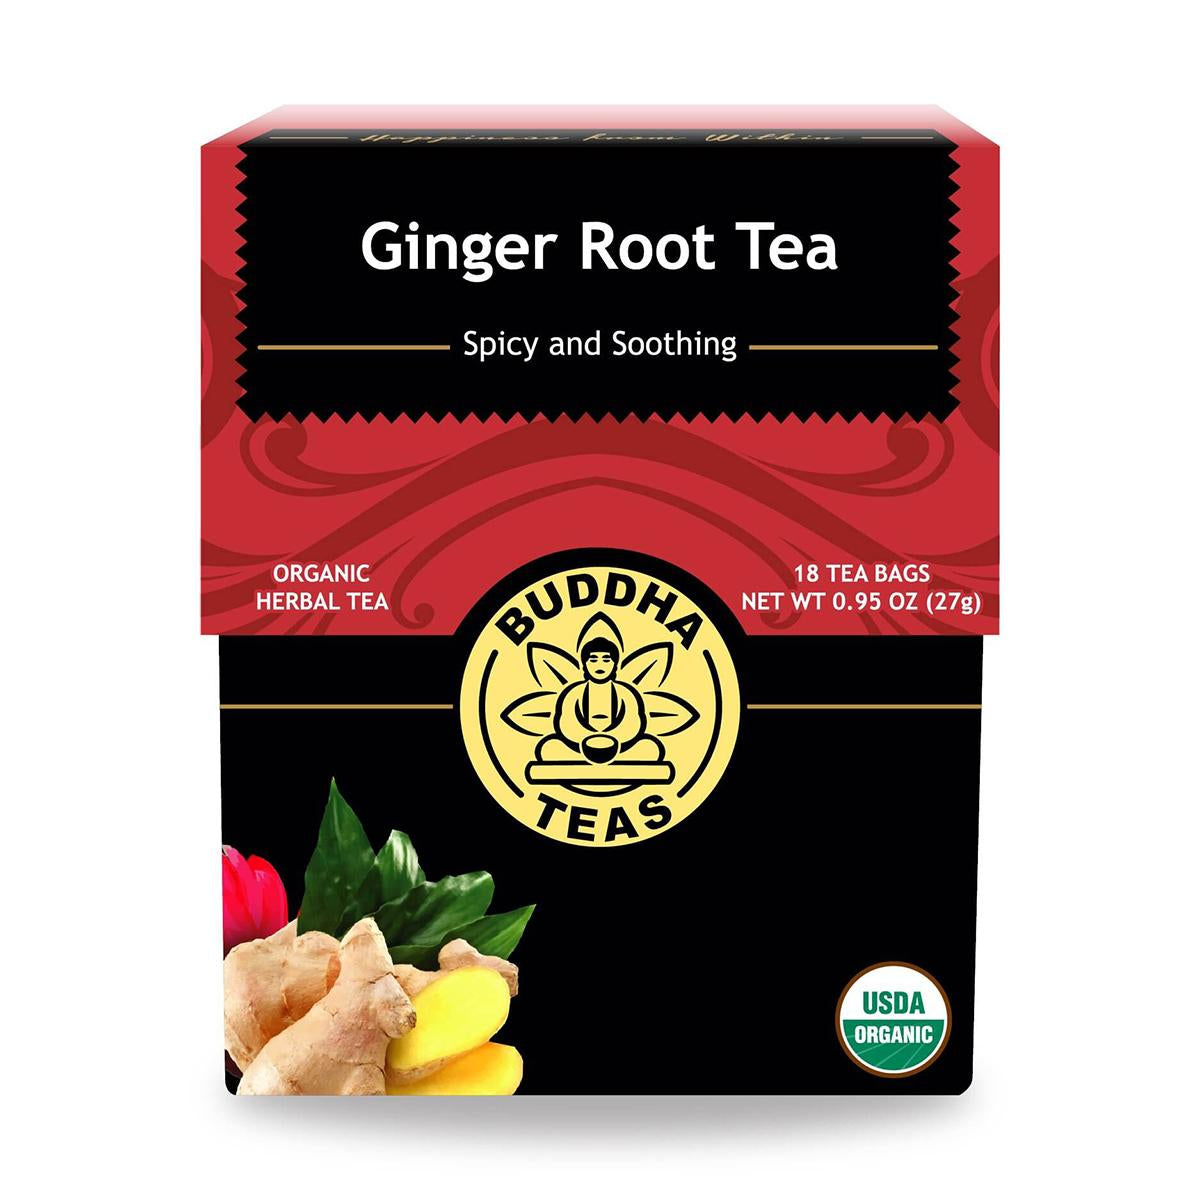 Primary image of Organic Ginger Root Tea